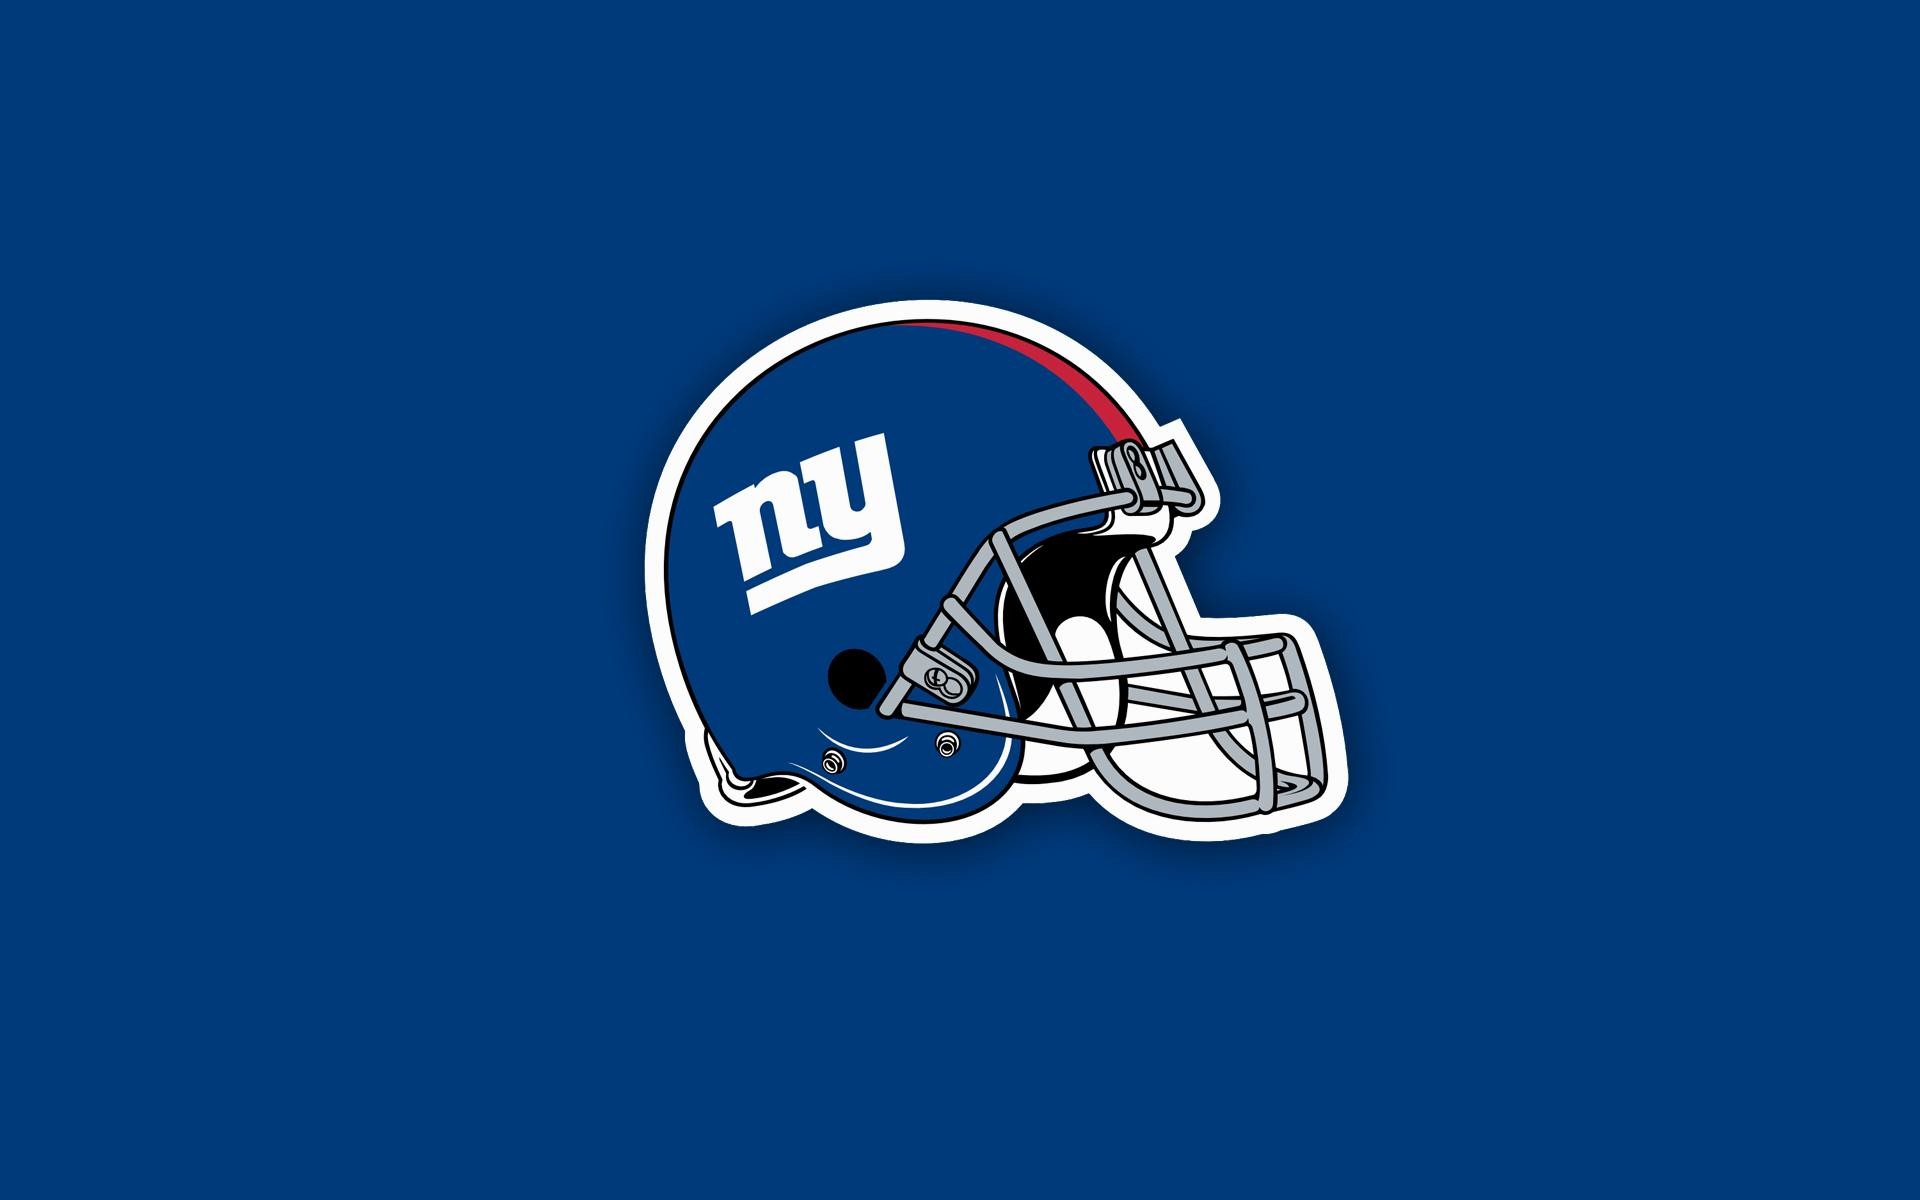 Wallpaper.wiki New york giants photos download PIC